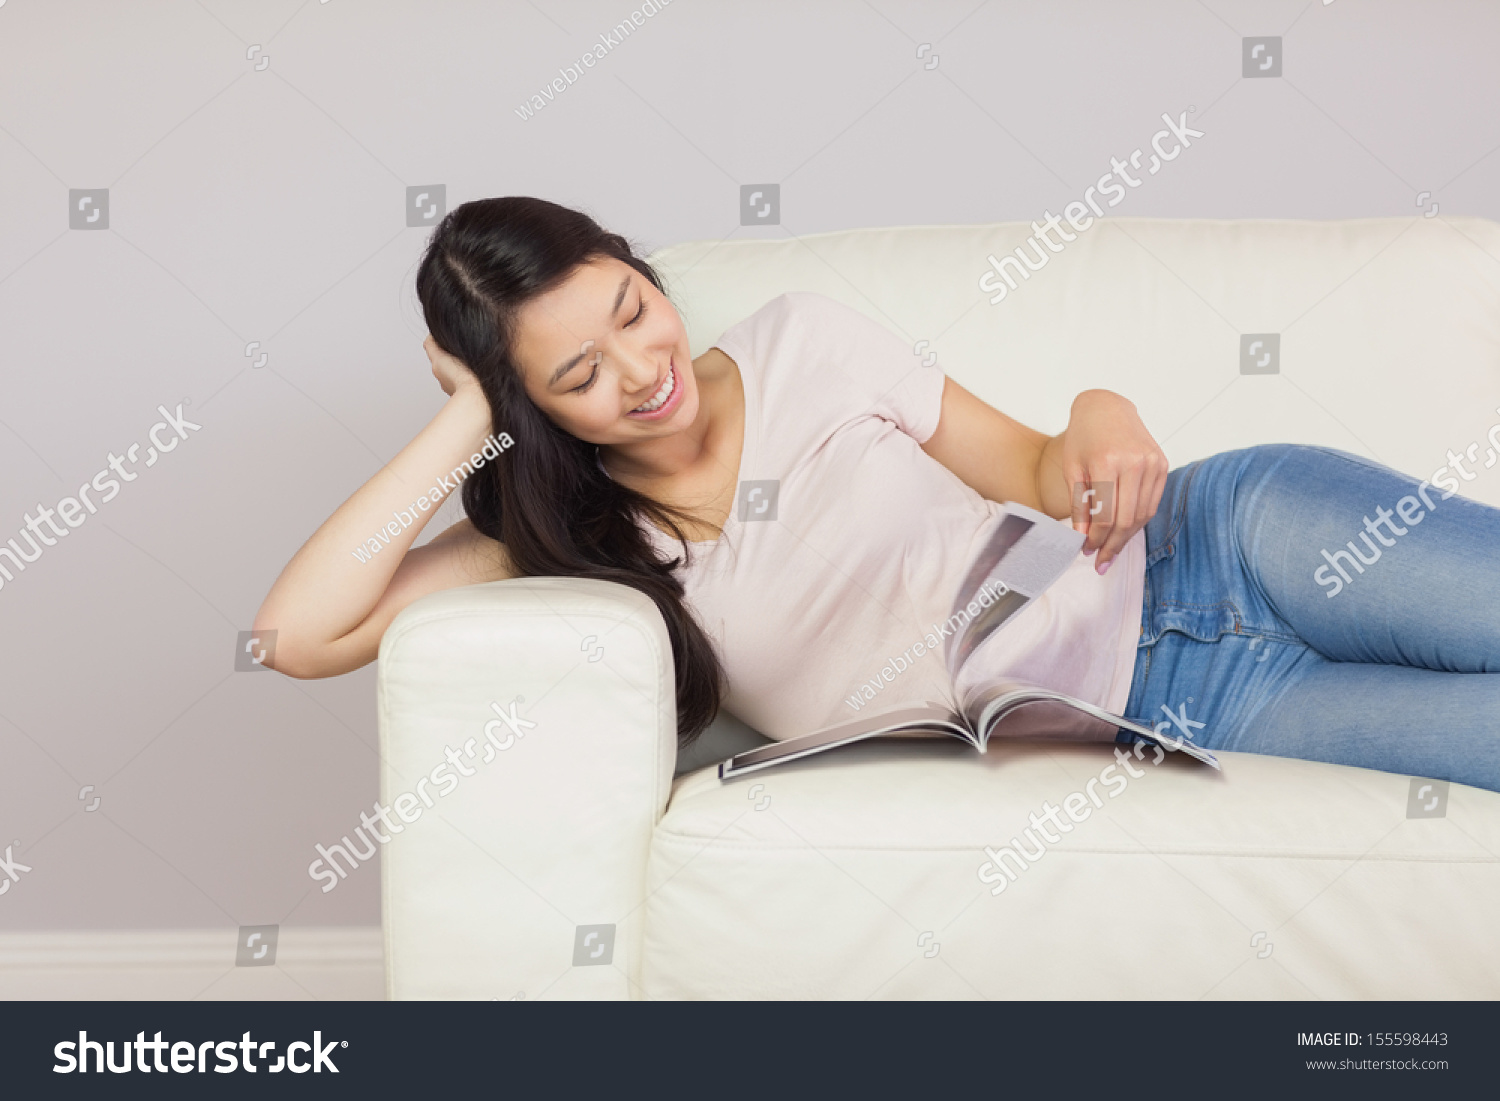 Cheerful asian girl lying on the sofa reading a magazine at home in the sitting room #155598443